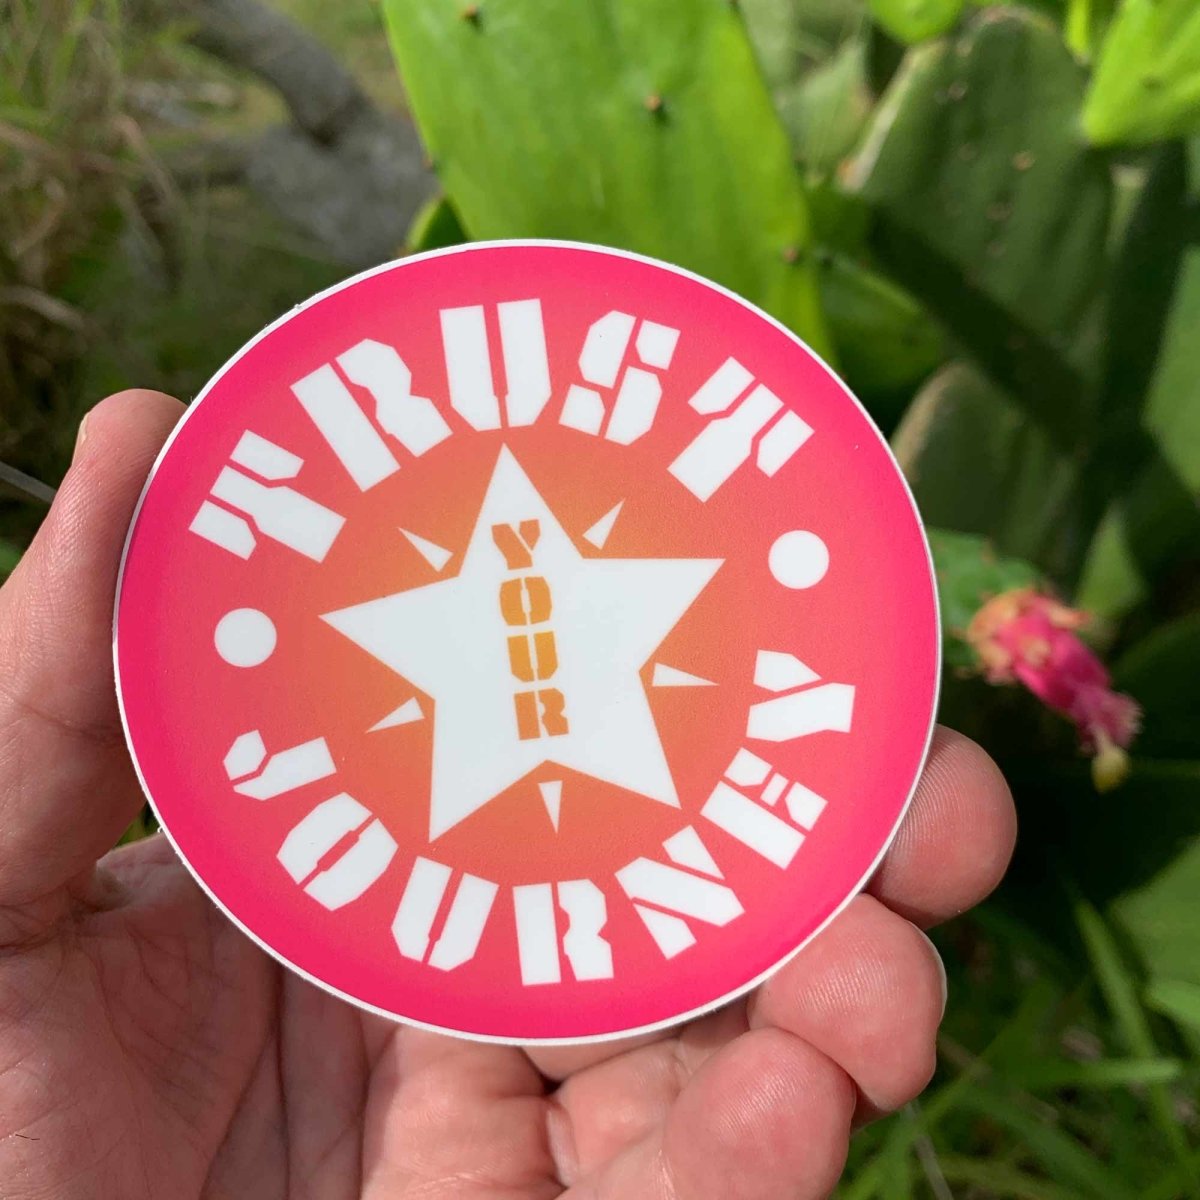 Trust Your Journey, Star - Premium Sticker | Happy Life Mantra Gift, Recover Bliss